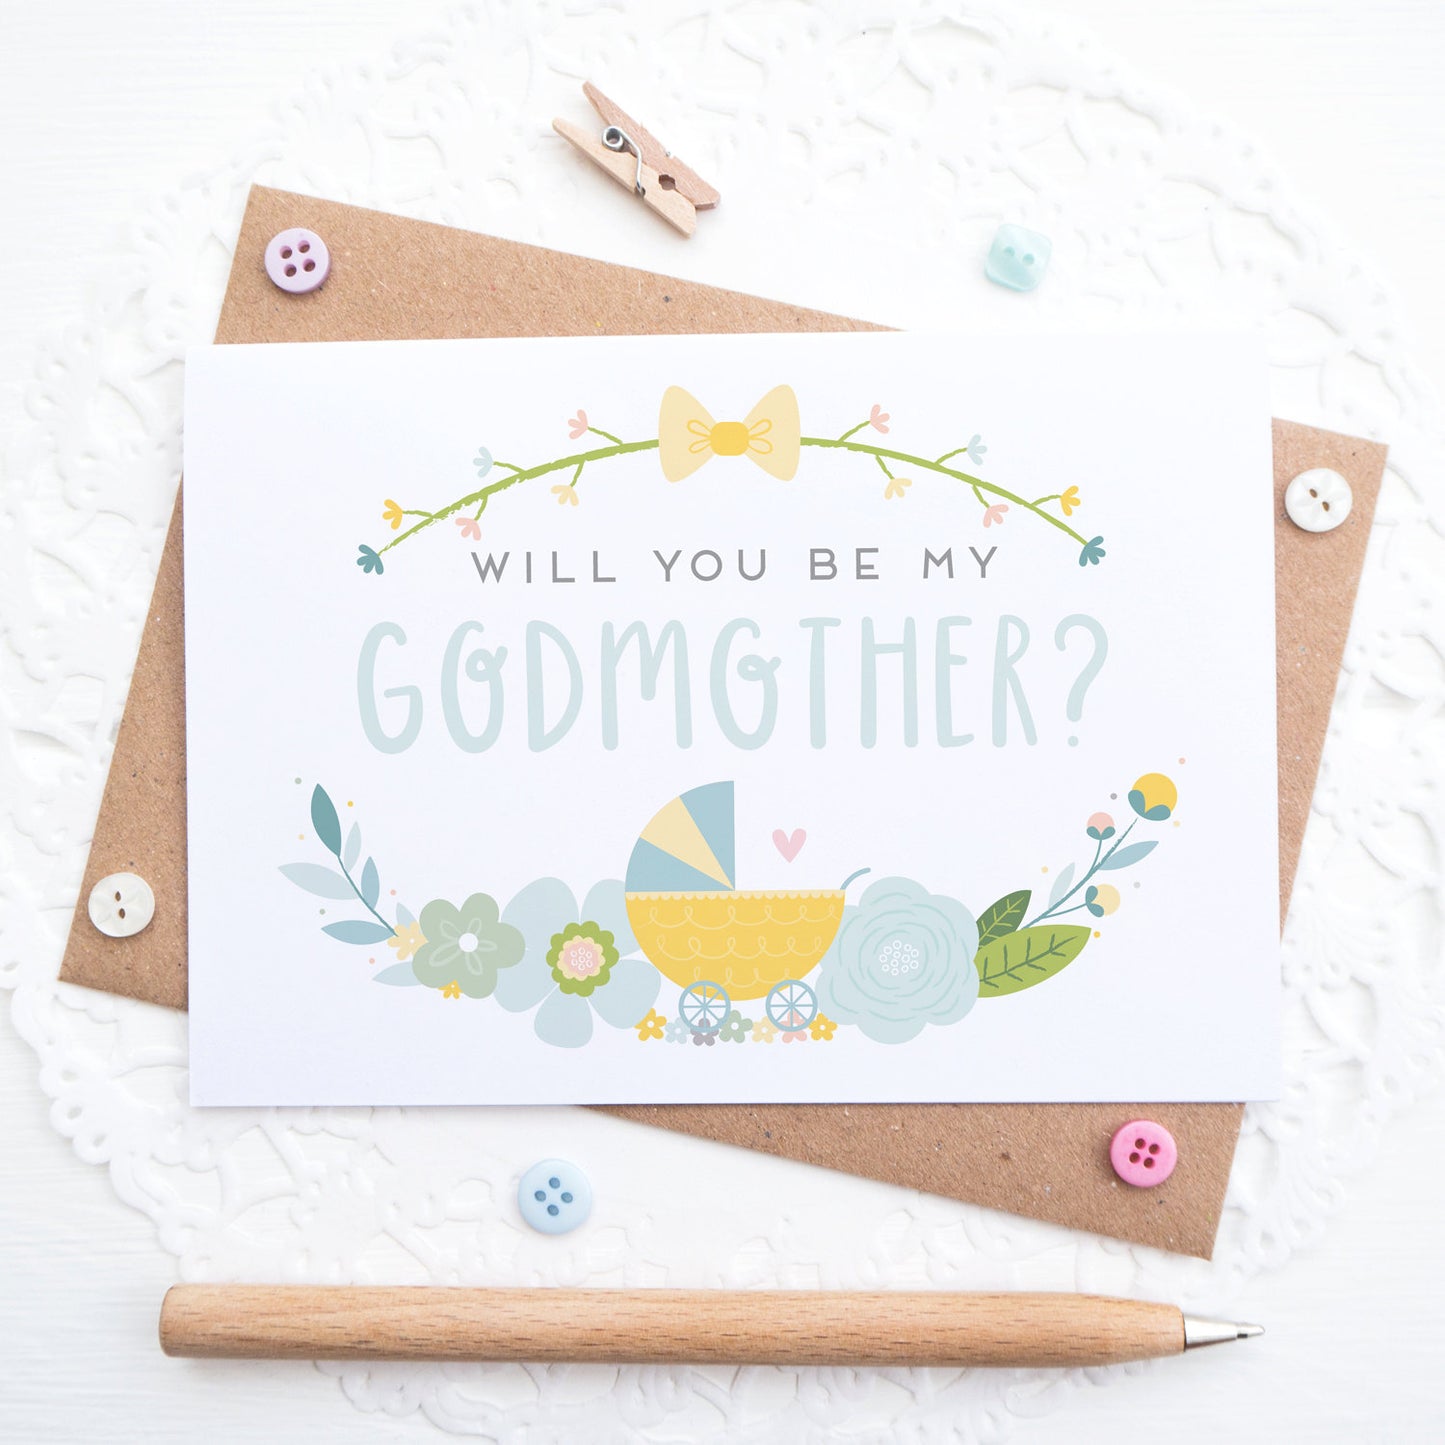 Will you be my Godmother card in blue